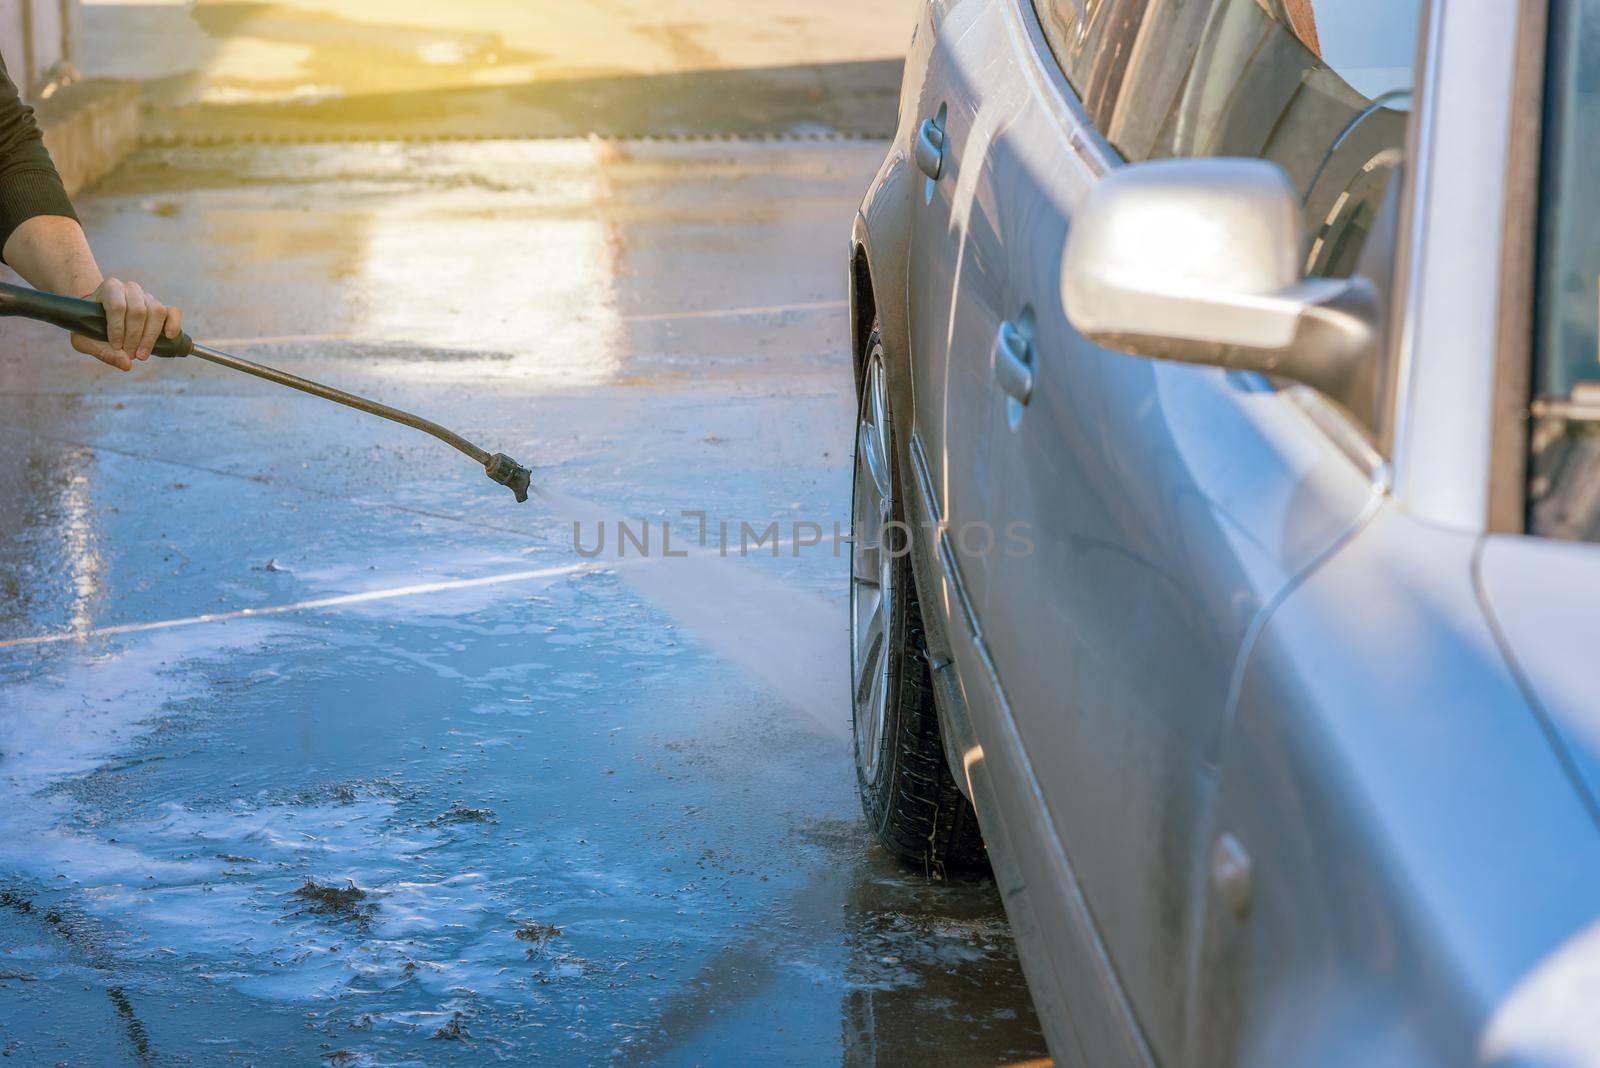 Car washing with flowing water. Outdoor Self Service Cleaning Car Using High Pressure Water